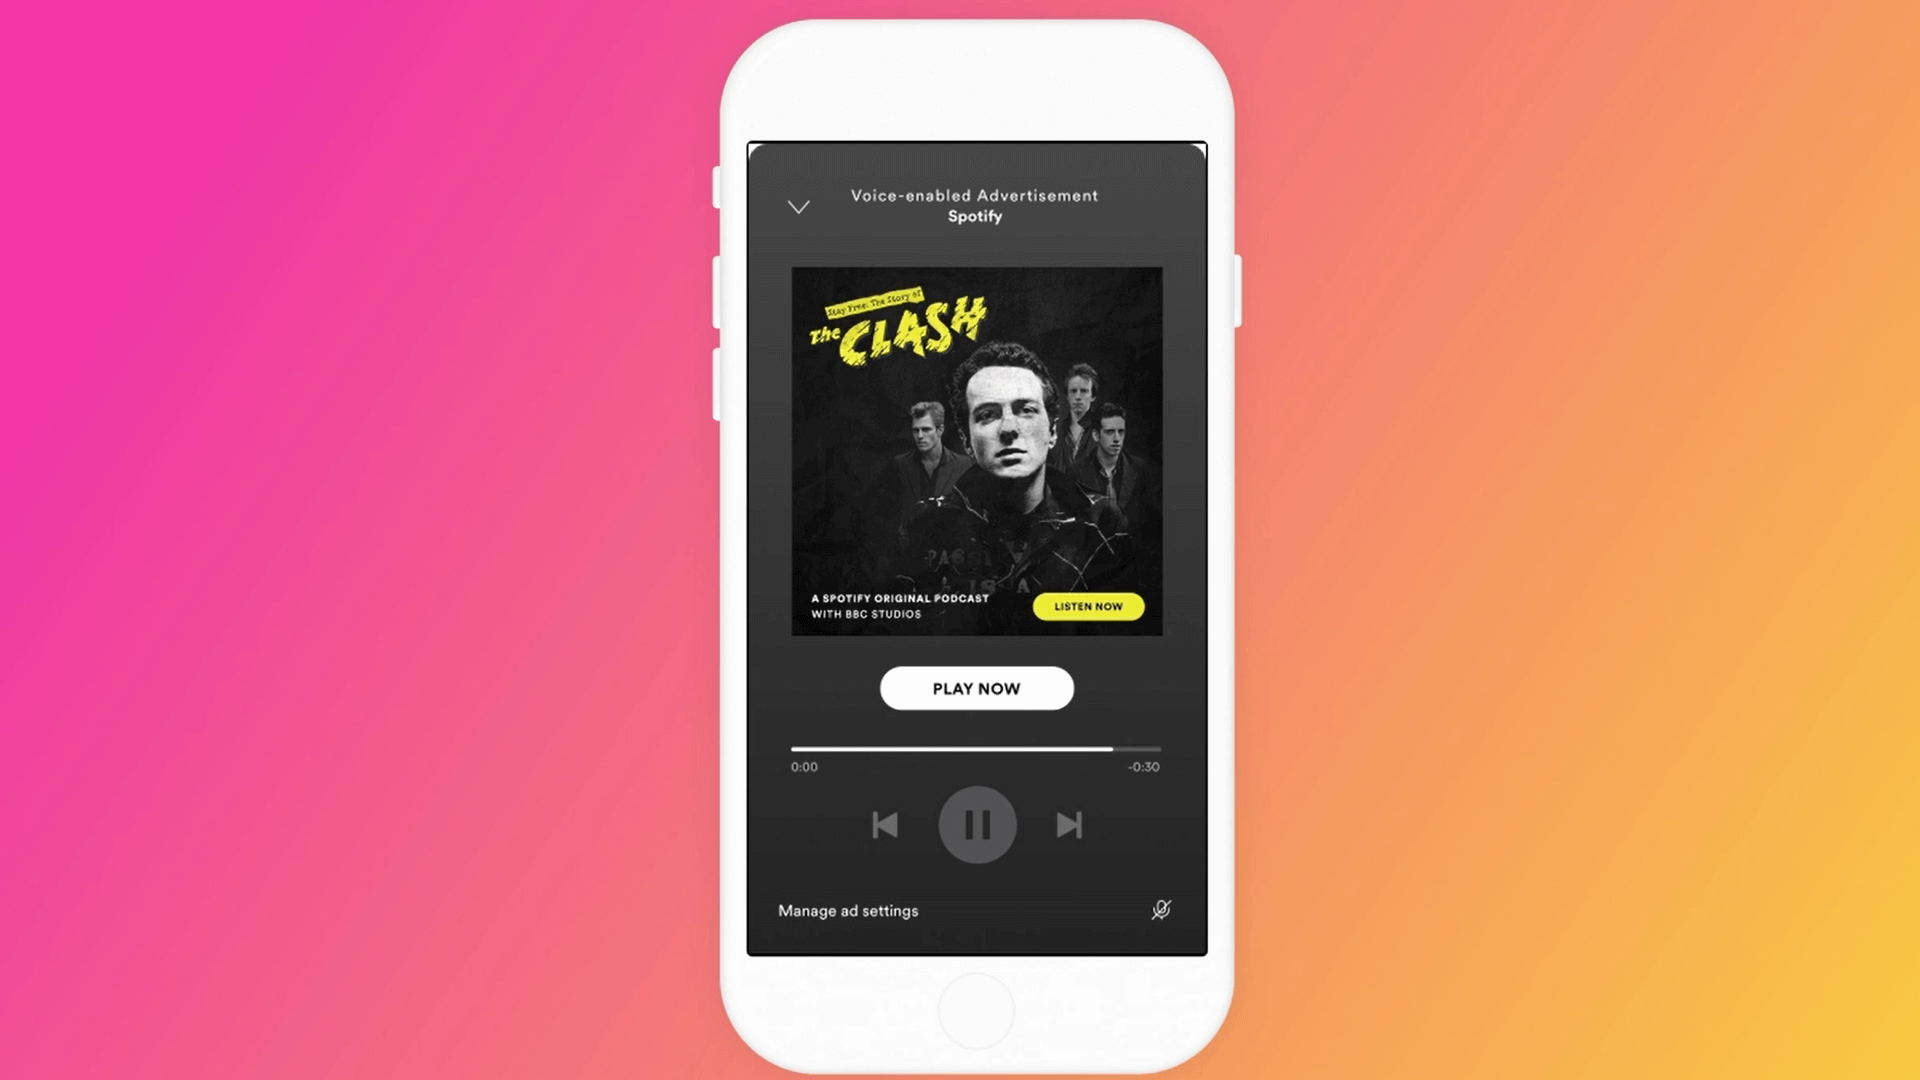 Spotify is testing voice-enabled ads that let listeners command engagement